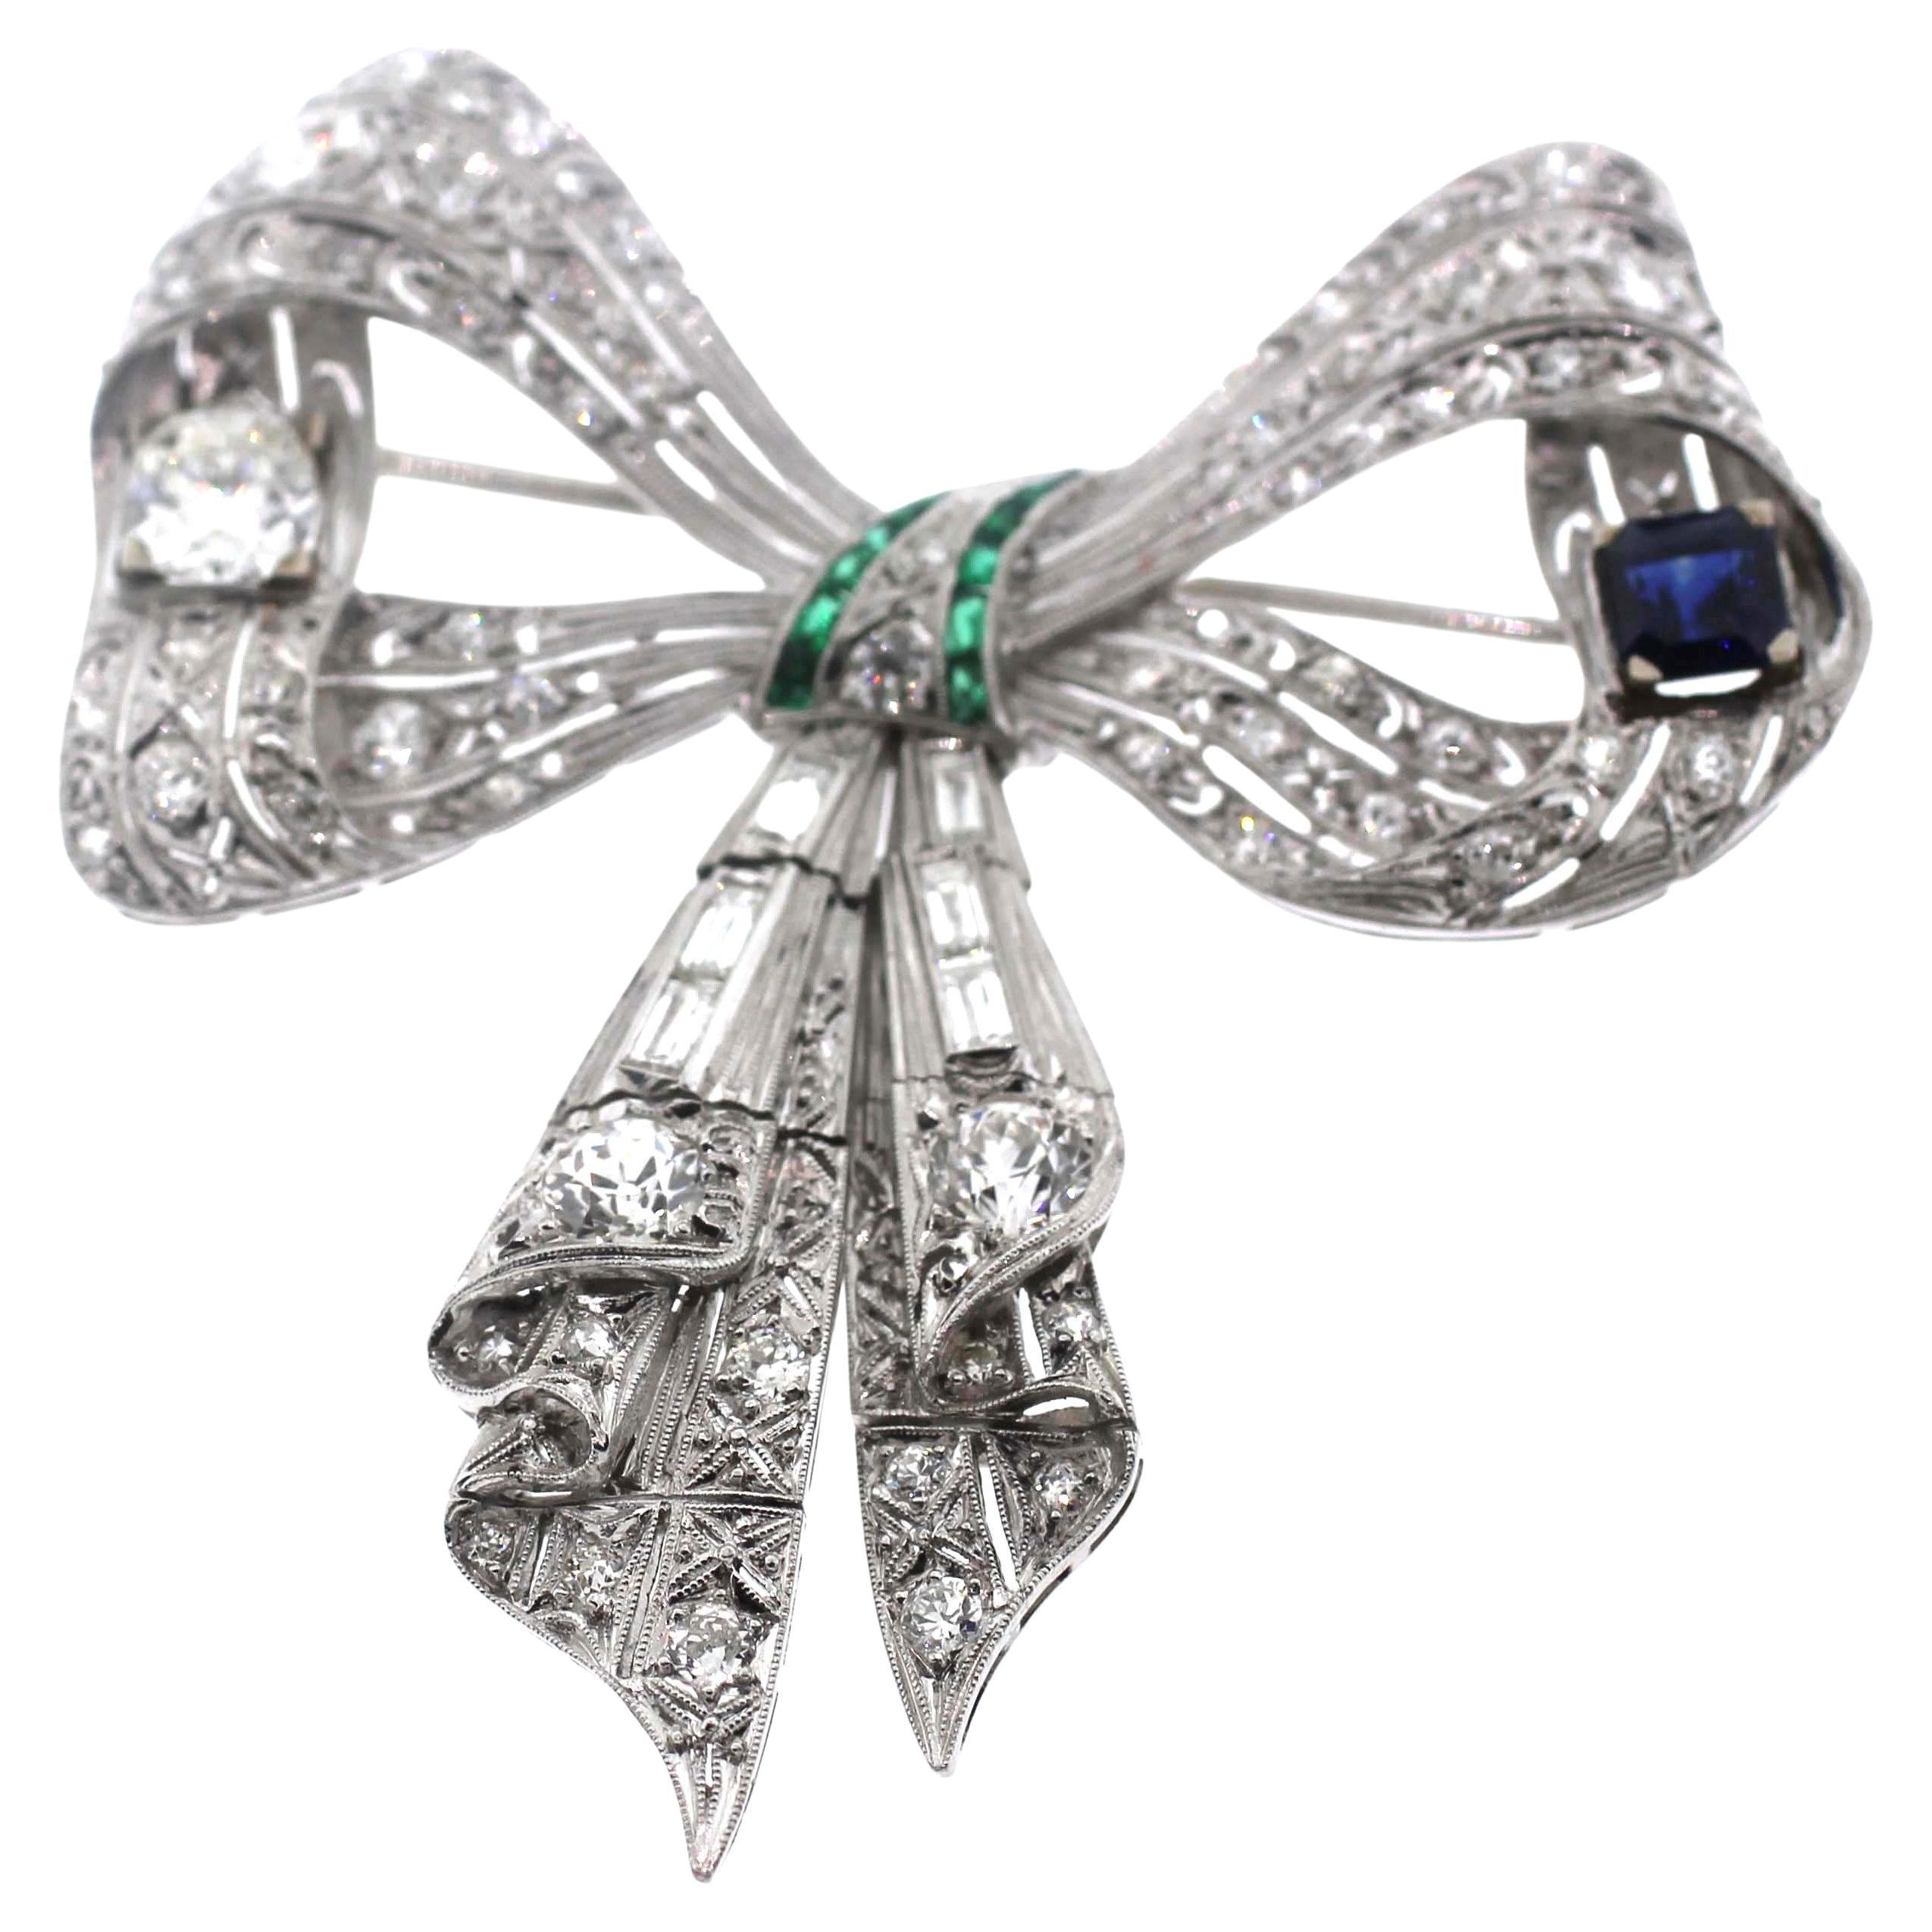 Platinum Diamonds, Sapphire and Emerald Bow Brooch Pendent
Gold Chain is not included